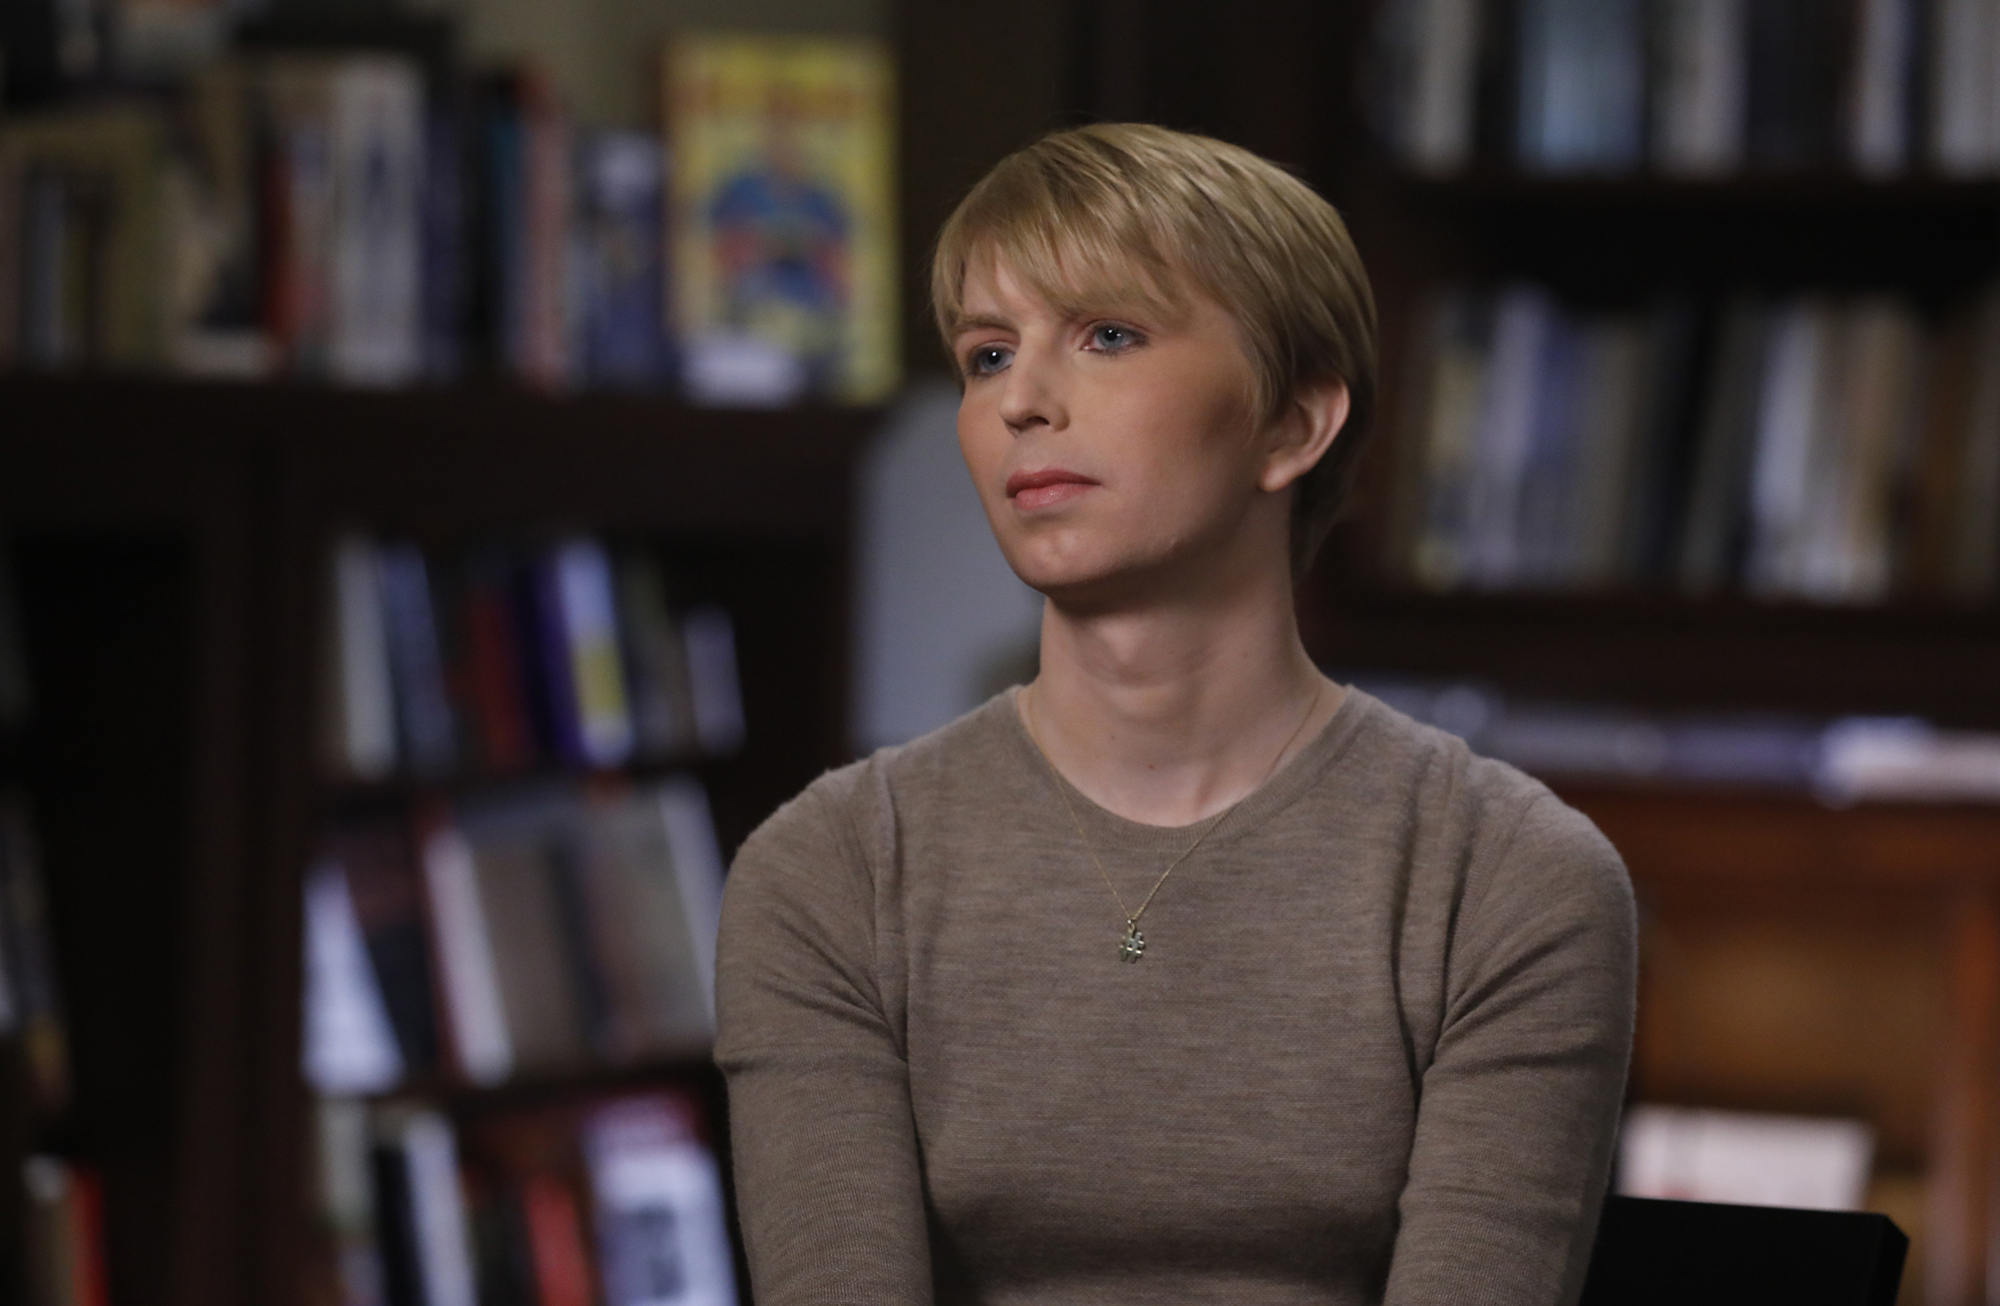 ABC NEWS - ABC News' "Nightline" co-anchor Juju Chang sits down with Chelsea Manning for the first exclusive television interview since Manning's prison release. The interview will air on an upcoming special edition of Nightline, "Declassified: The Chelsea Manning Story." 
                      (Photo by Heidi Gutman/ABC via Getty Images) 
                      CHELSEA MANNING (Heidi Gutman&mdash;ABC via Getty Images)